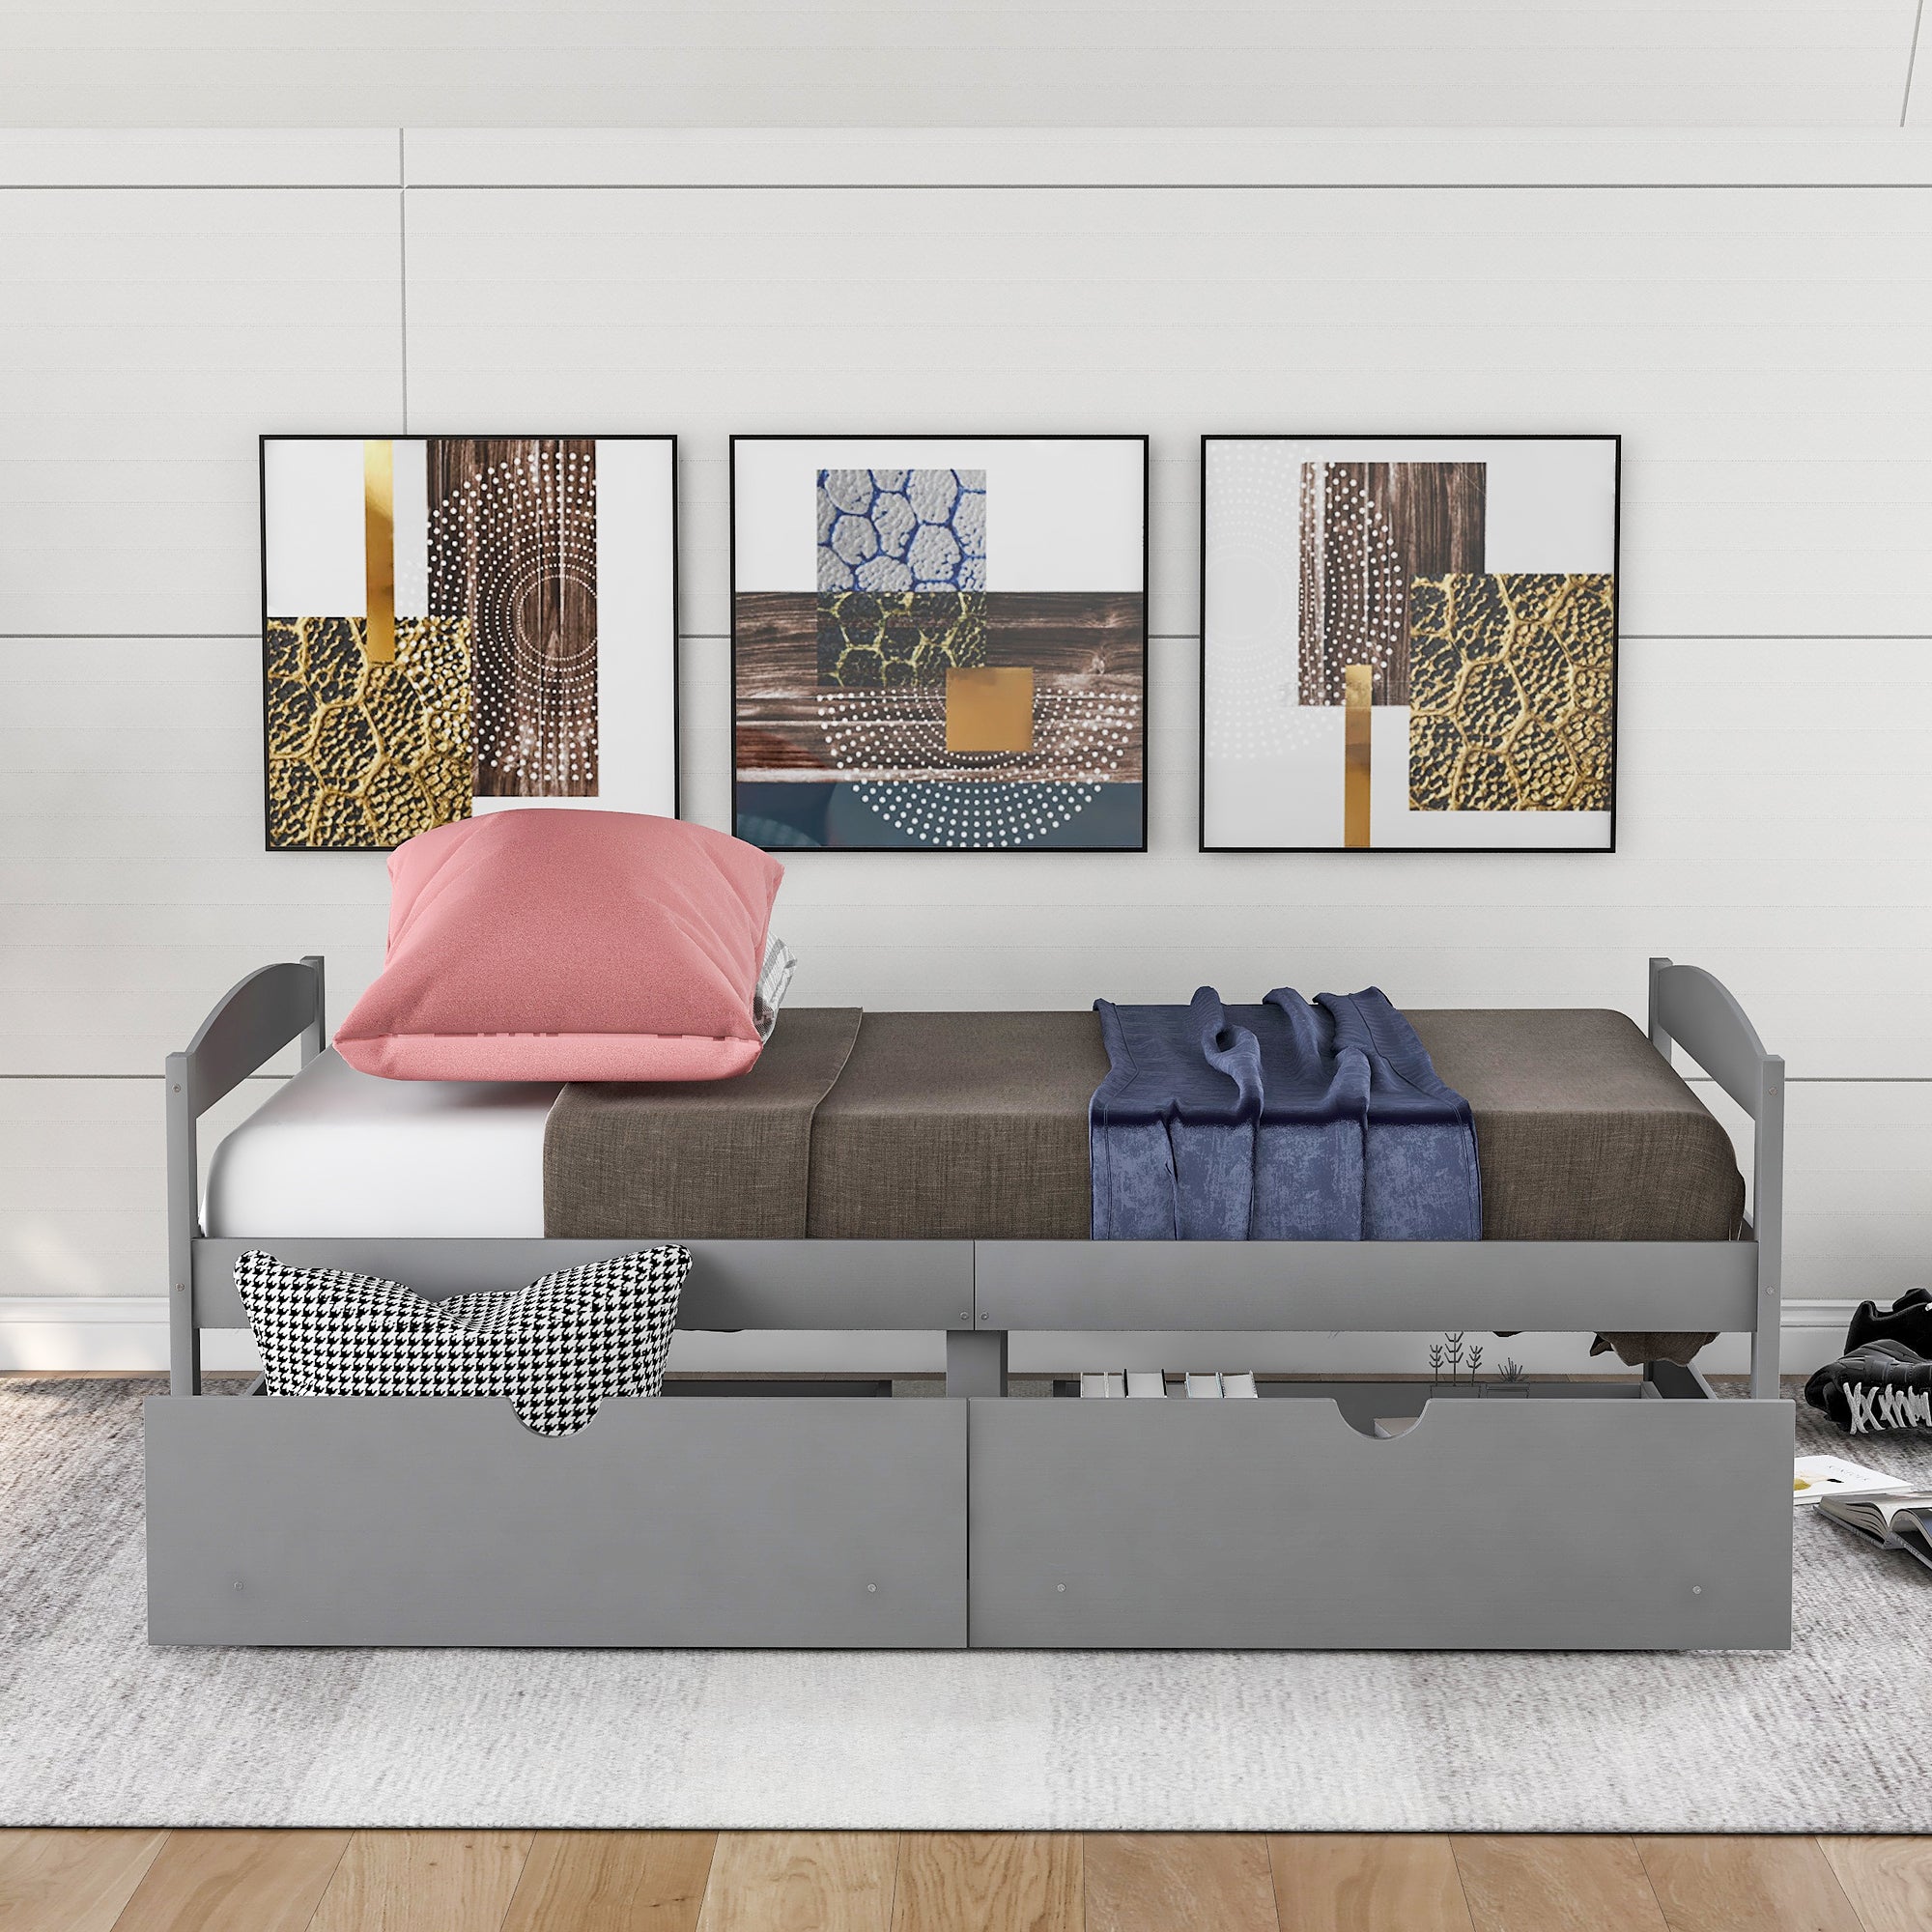 Twin Size Platform Bed with Two Drawers | Gray Finish | Space-Saving Solution